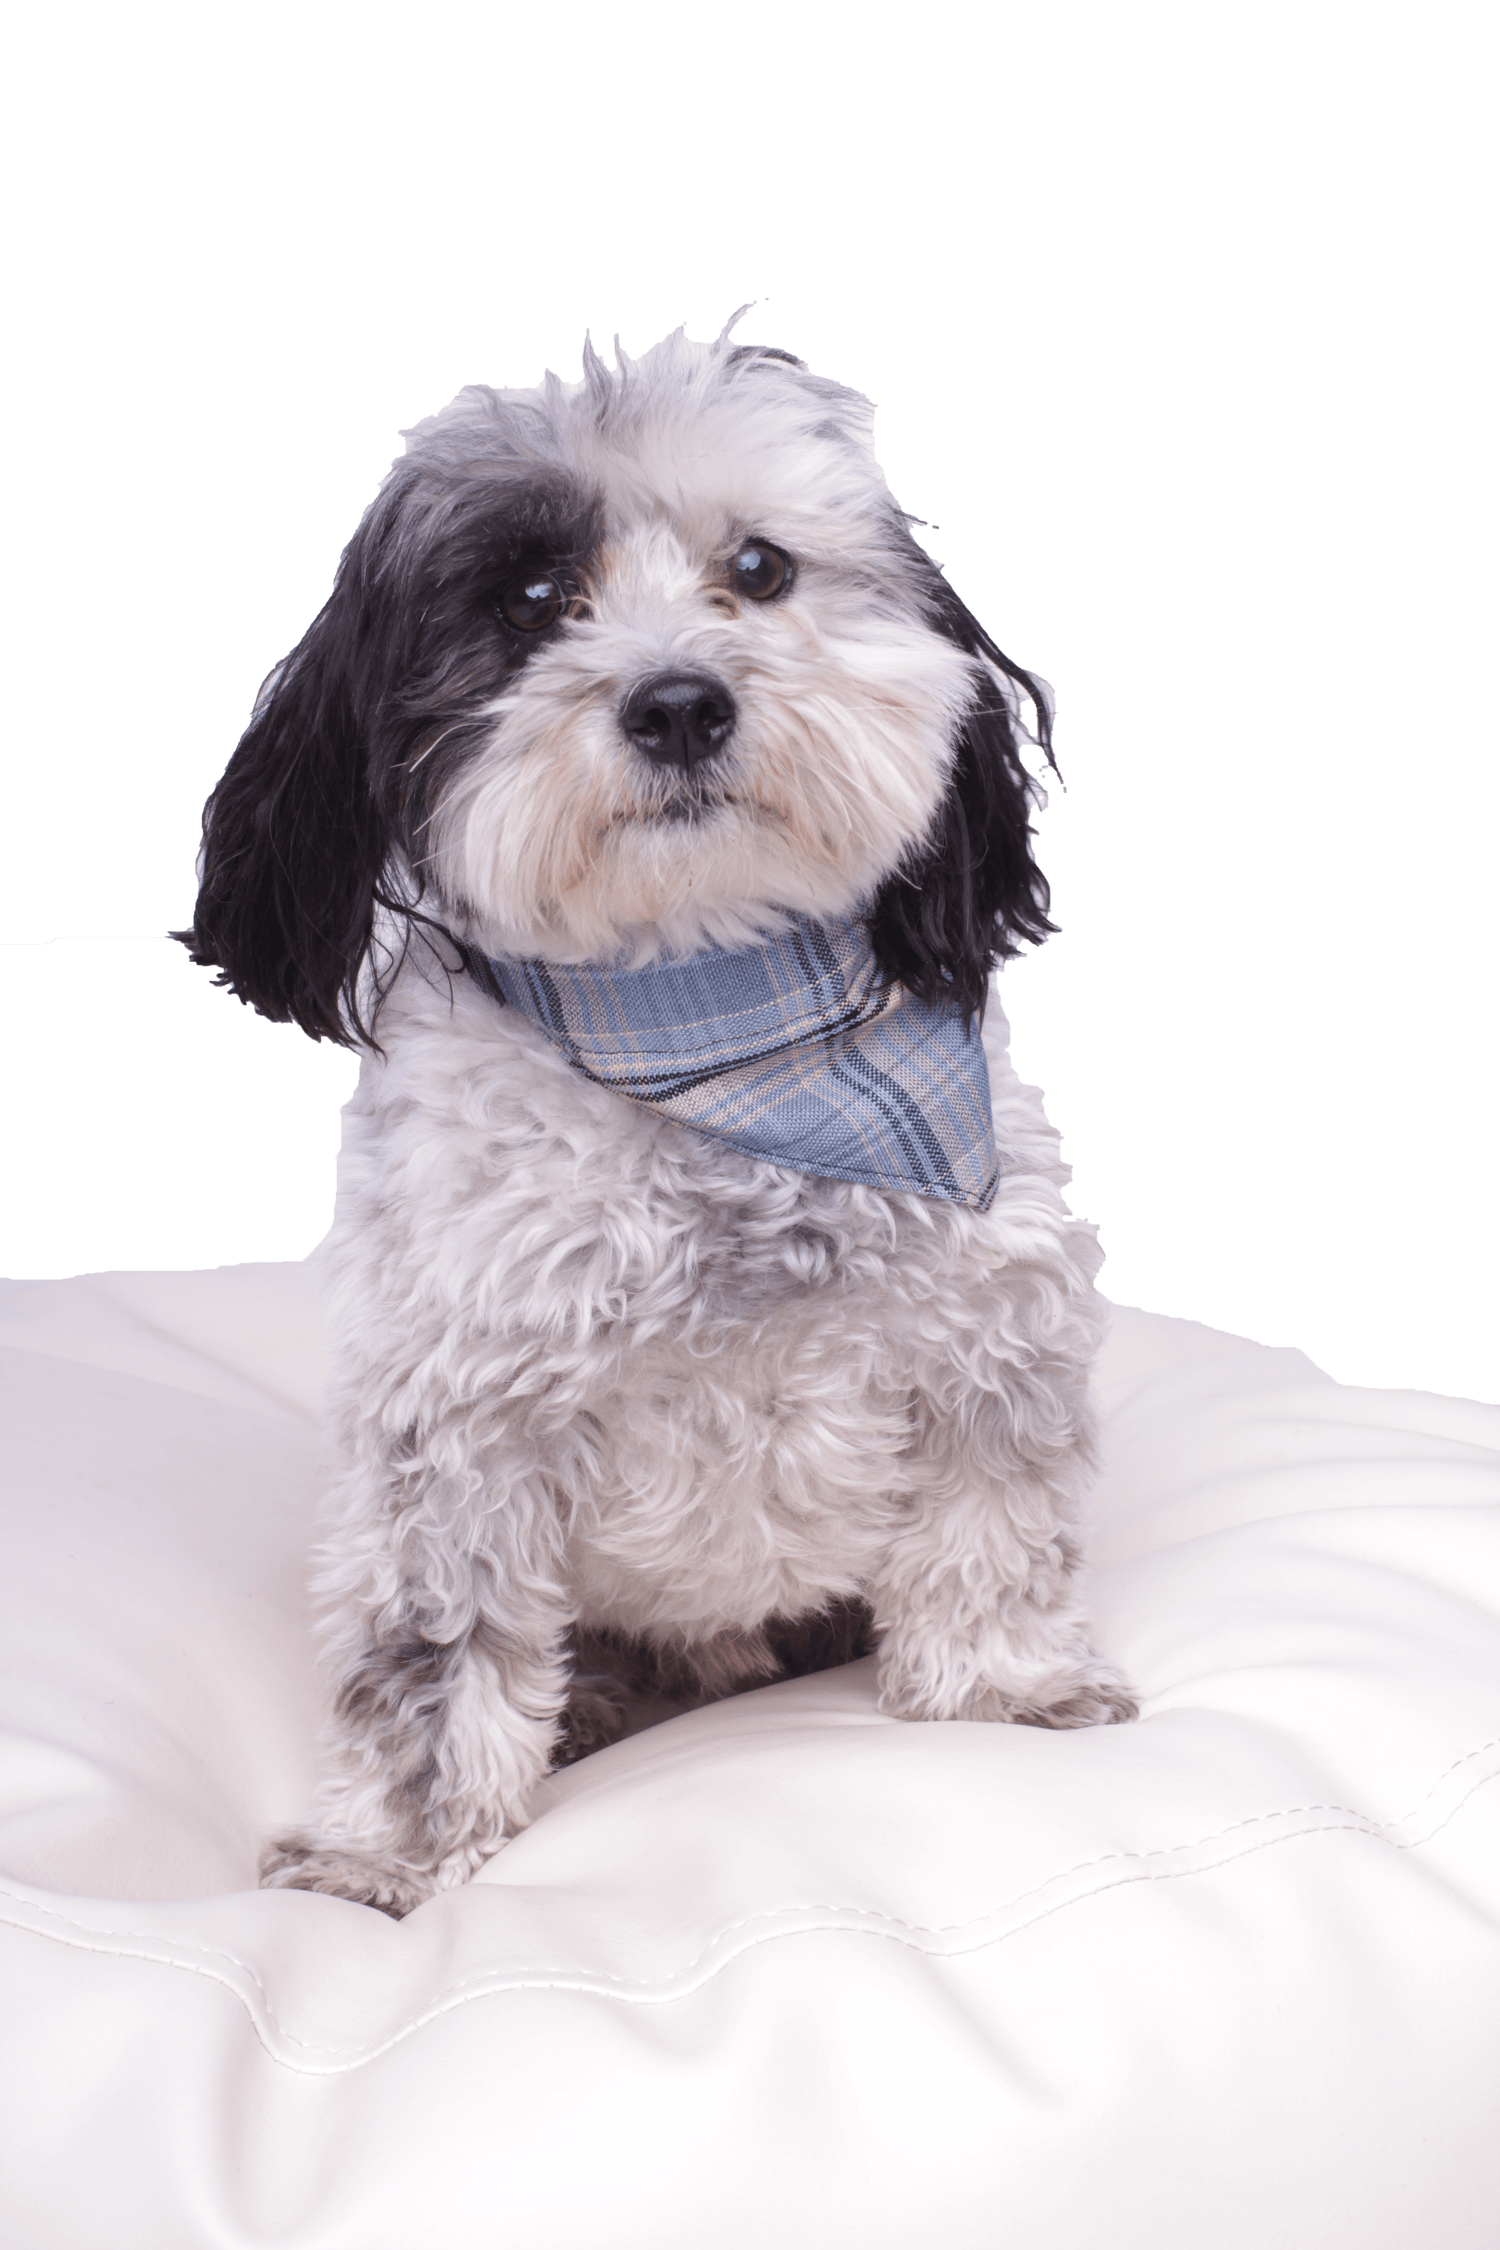 Manchester Bandana (serves as a collar; attach the dog leash directly to the bandana)